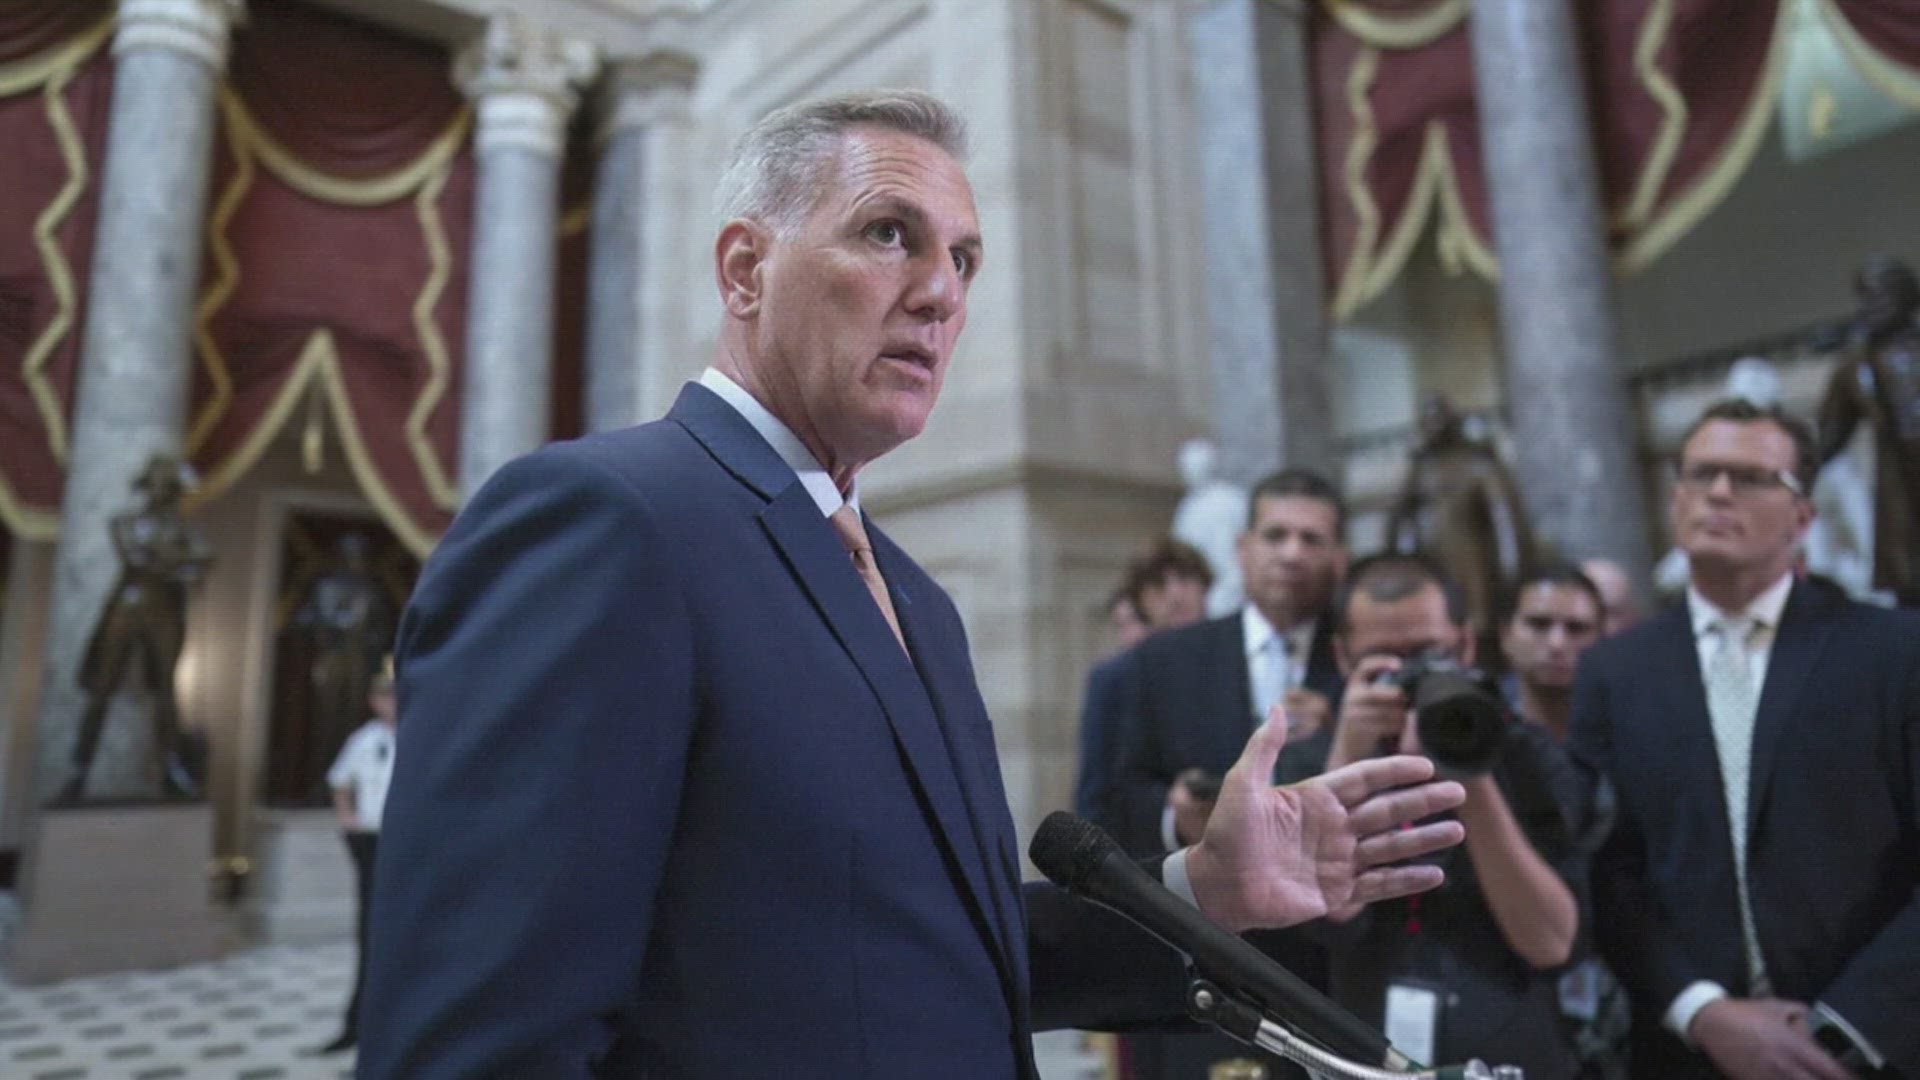 Rep. Kevin McCarthy: "This logical next step will give our committees the full power to gather the full facts and answers for the American public."